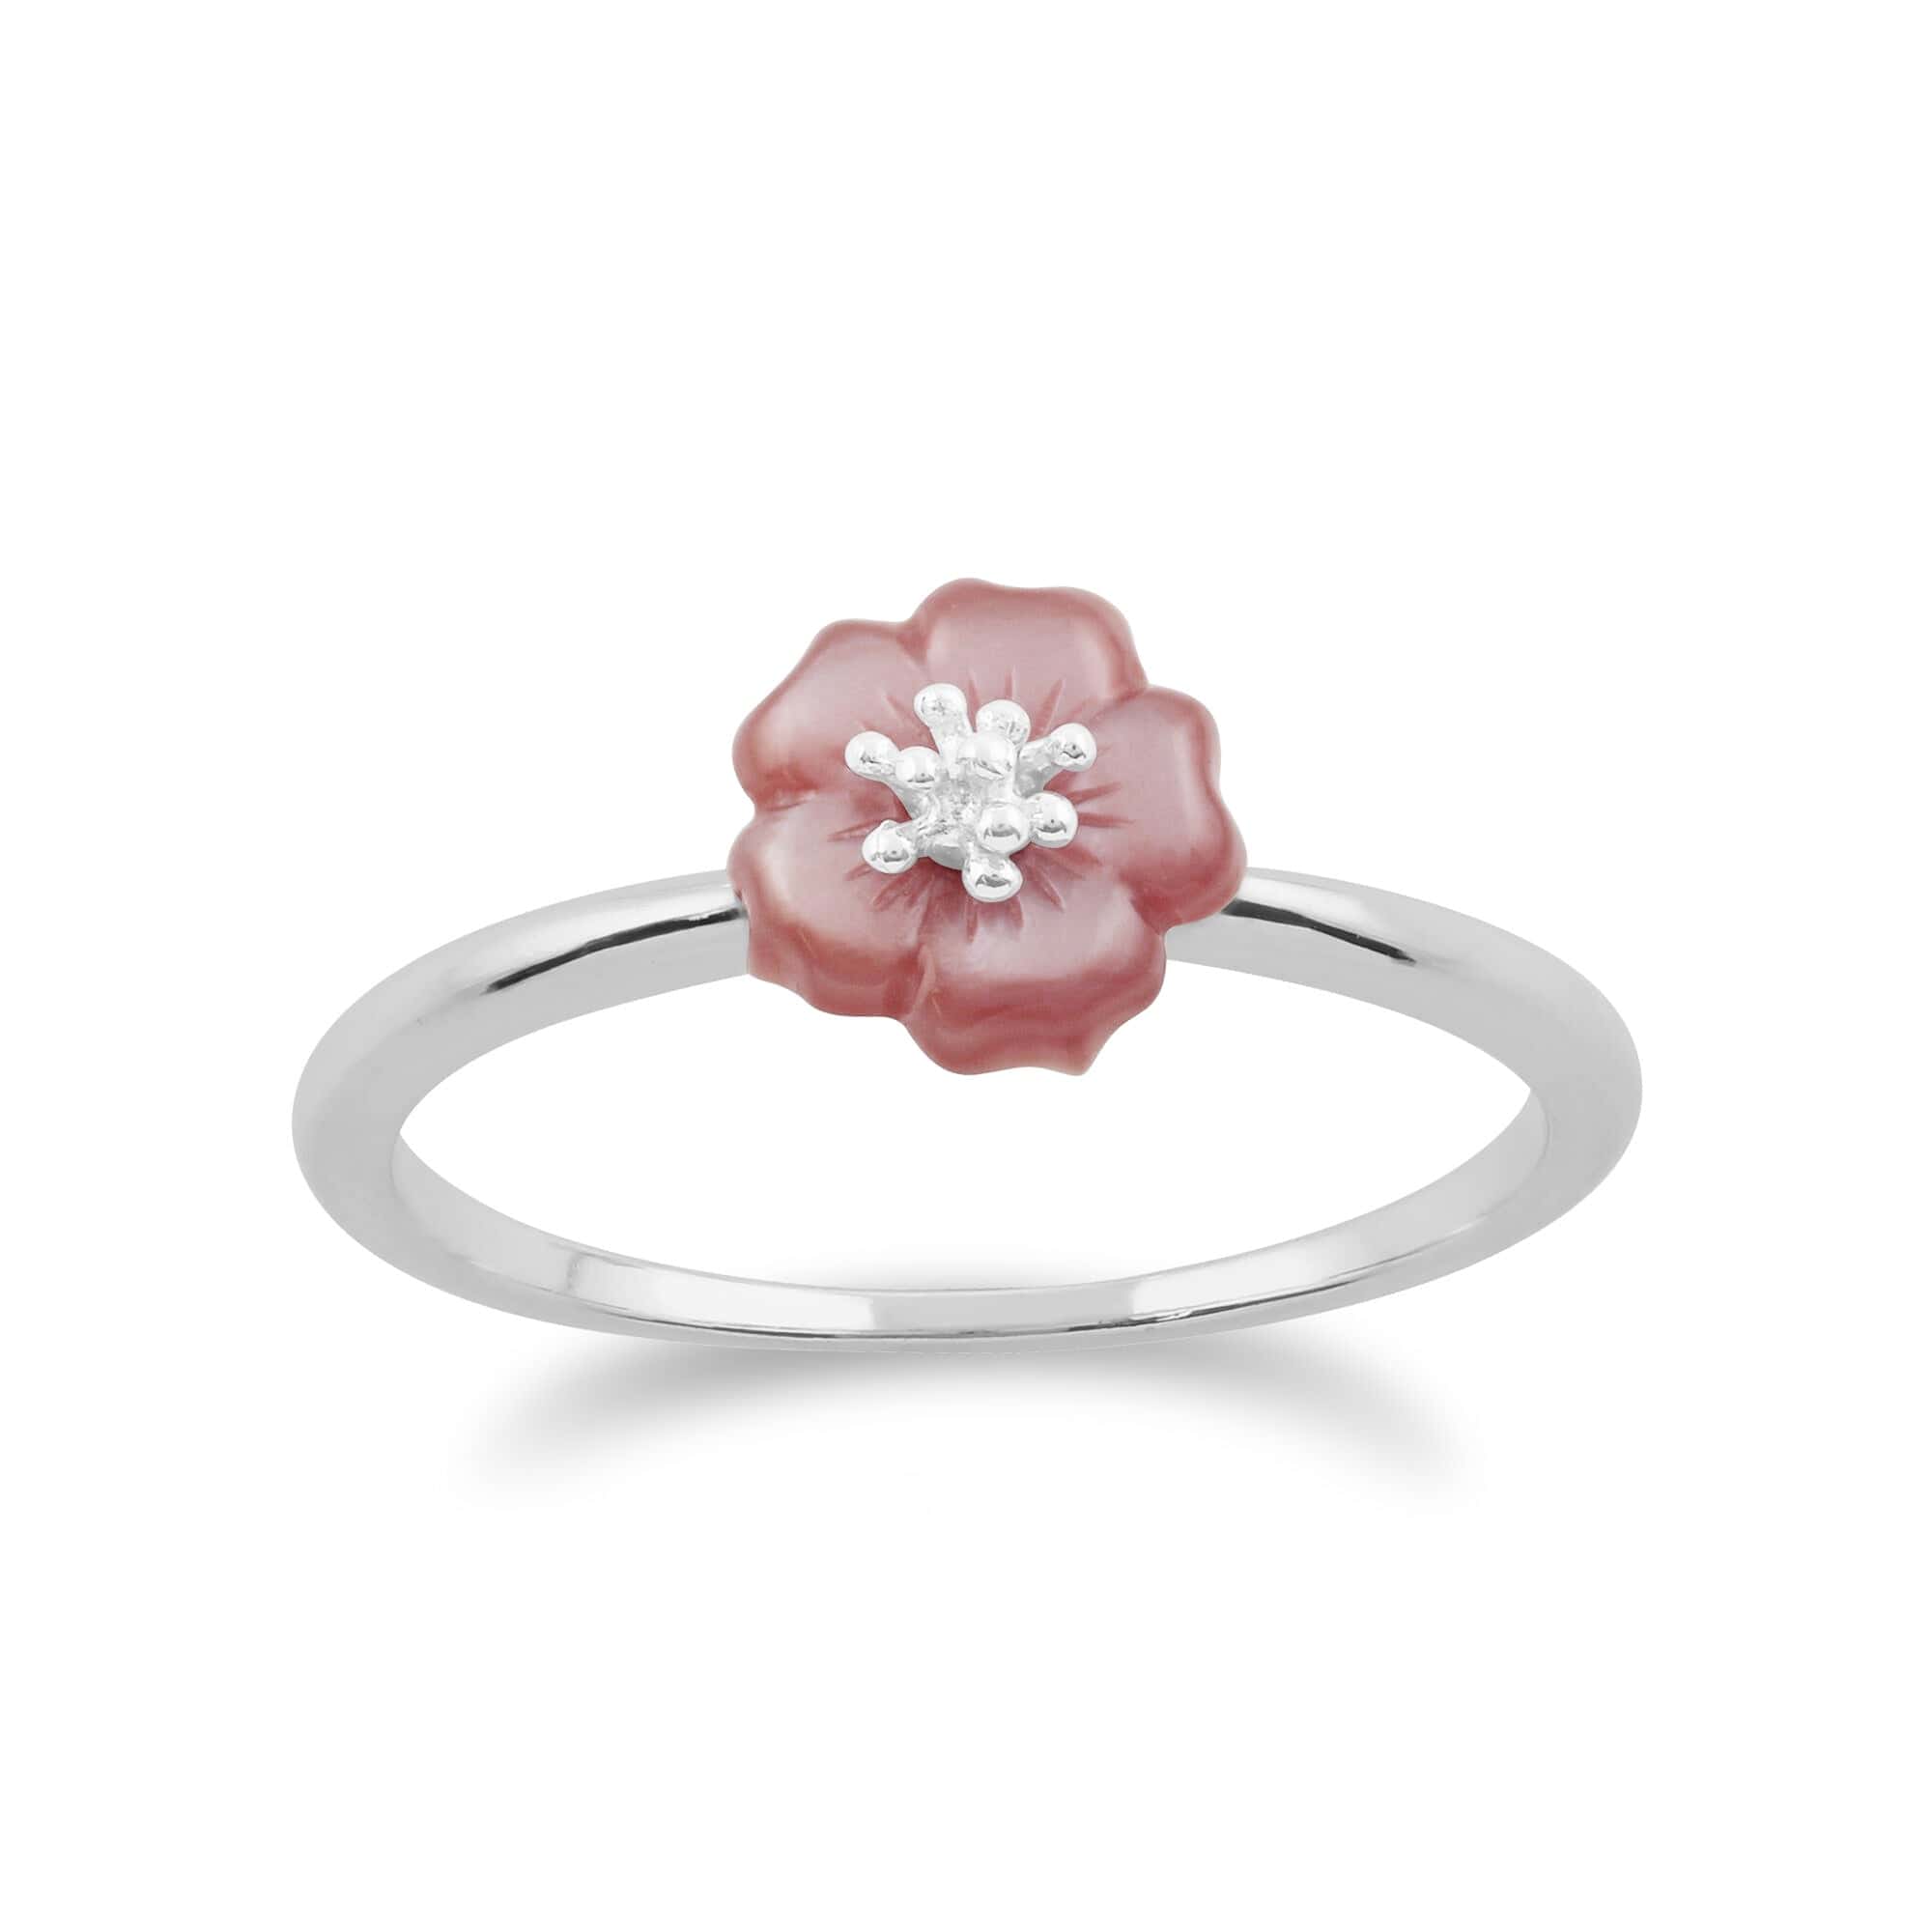 Gemondo Silver Pink Mother of Pearl Cherry Blossom Ring Image 1